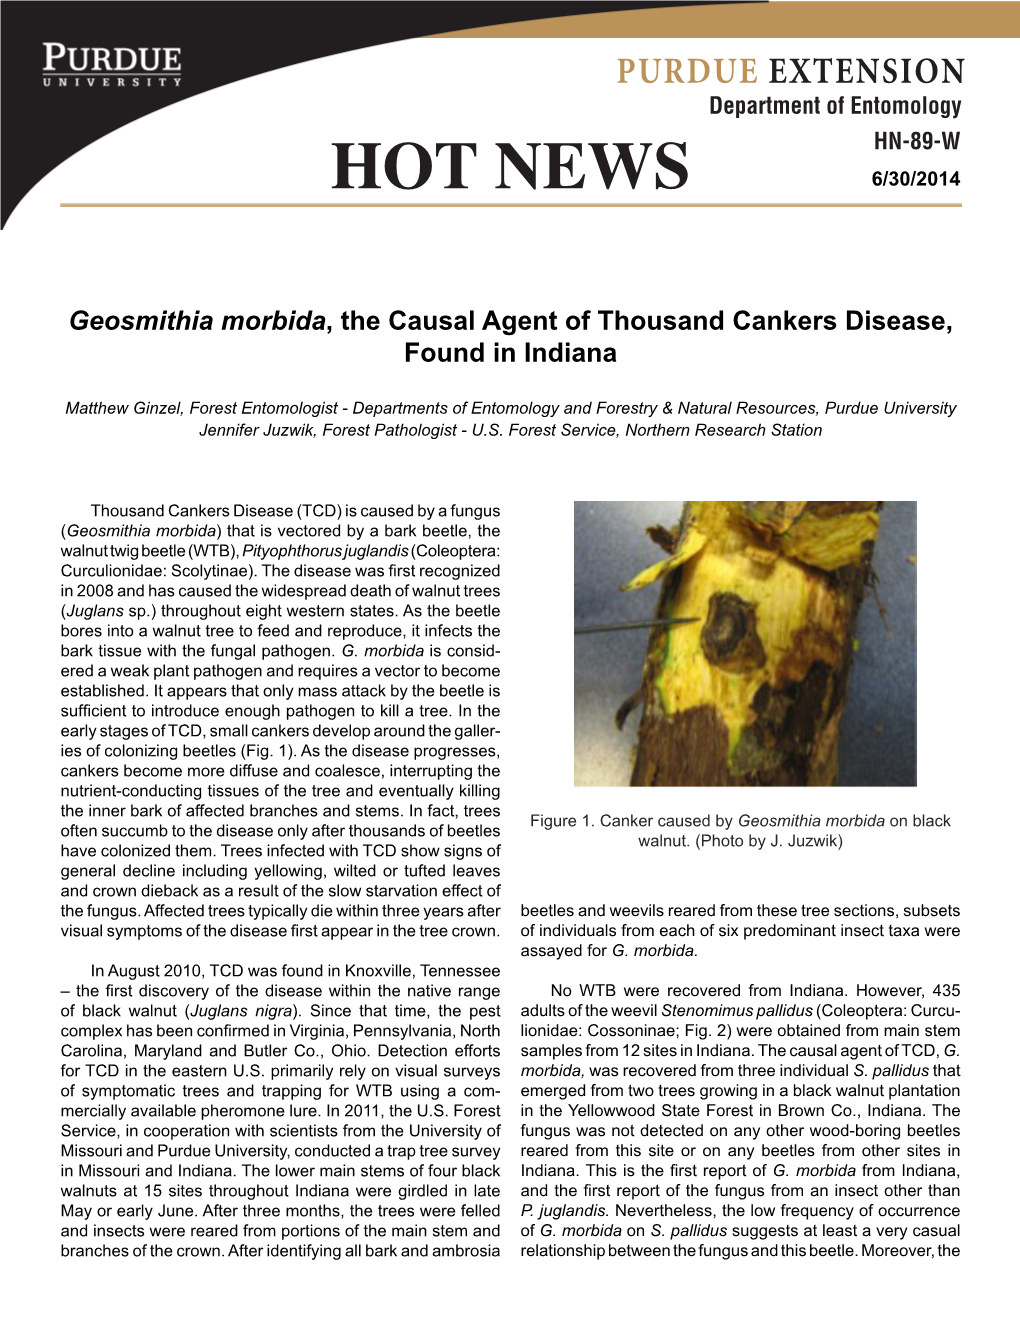 Geosmithia Morbida, the Causal Agent of Thousand Cankers Disease, Found in Indiana